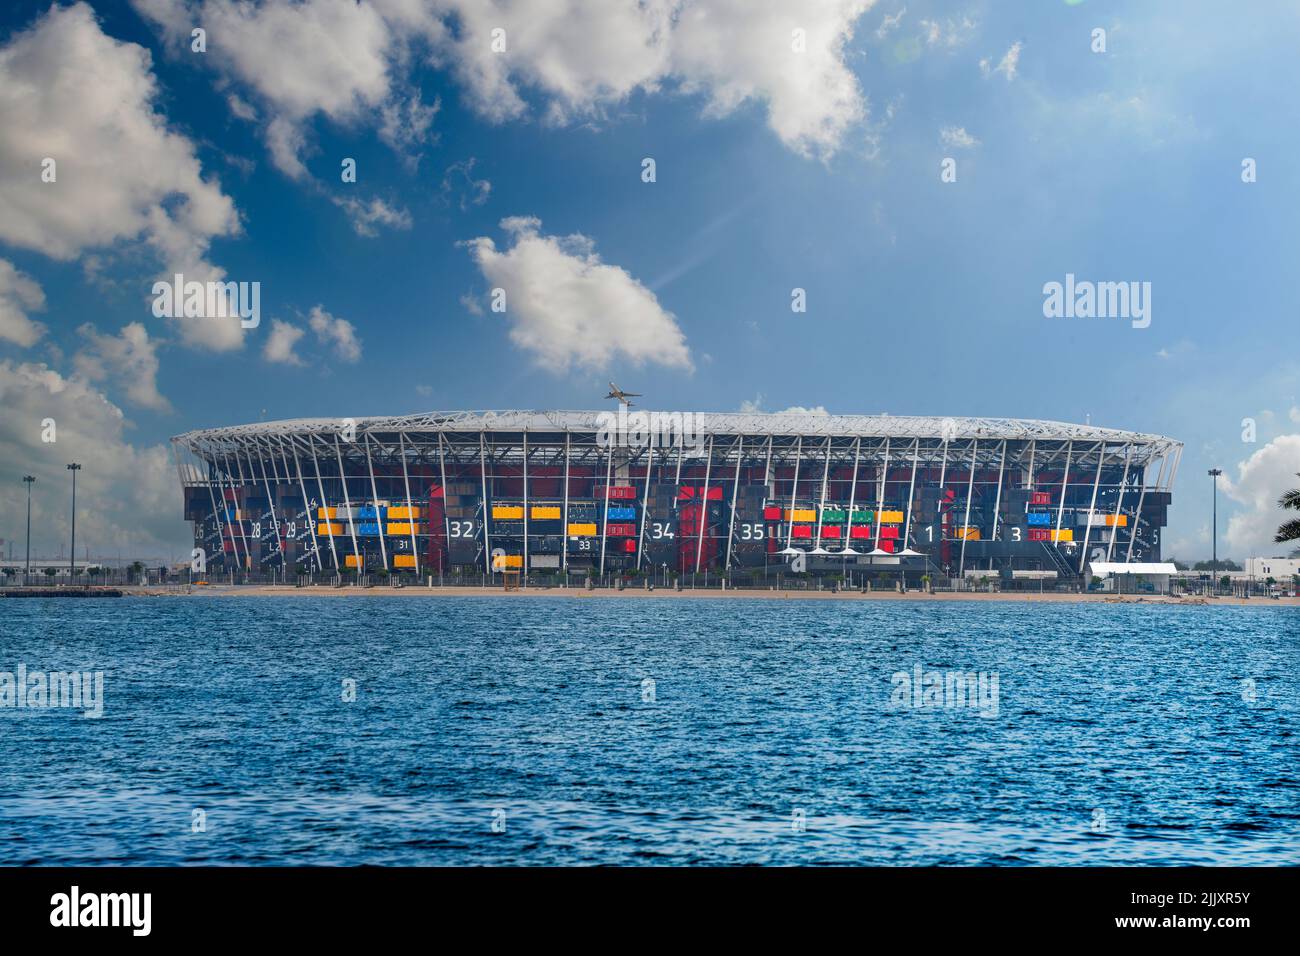 Stadium 974 one of the venue of Qatar 2022 FIFA world cup football -974 is the international dialing code for  Doha Qatar -27-06-2022 Stock Photo